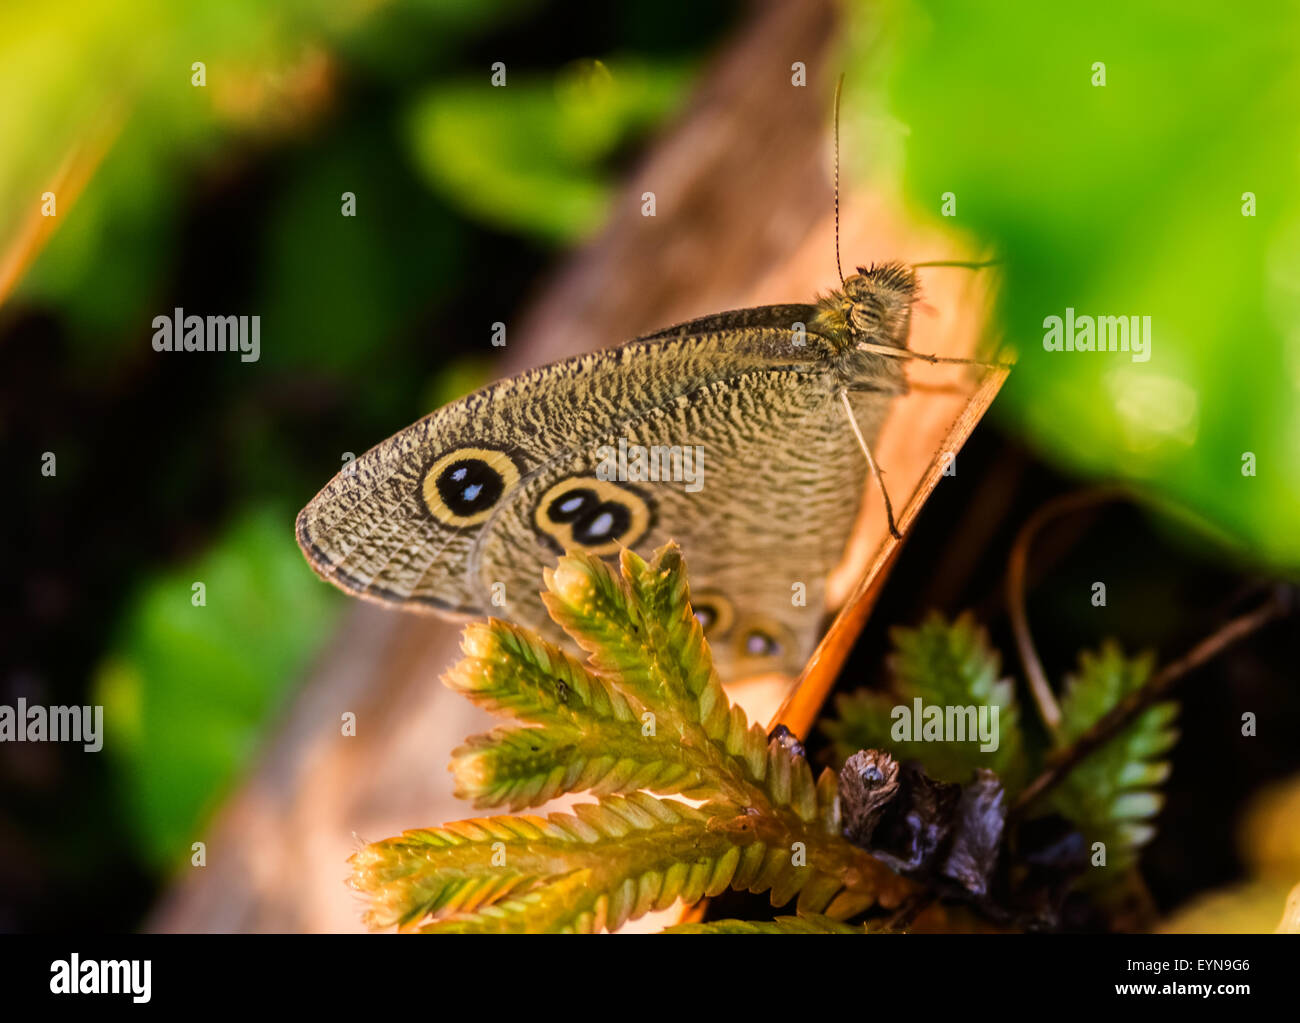 Small brown butterfly Common Fivering, Ypthima balduson grass during morning with copy space Stock Photo